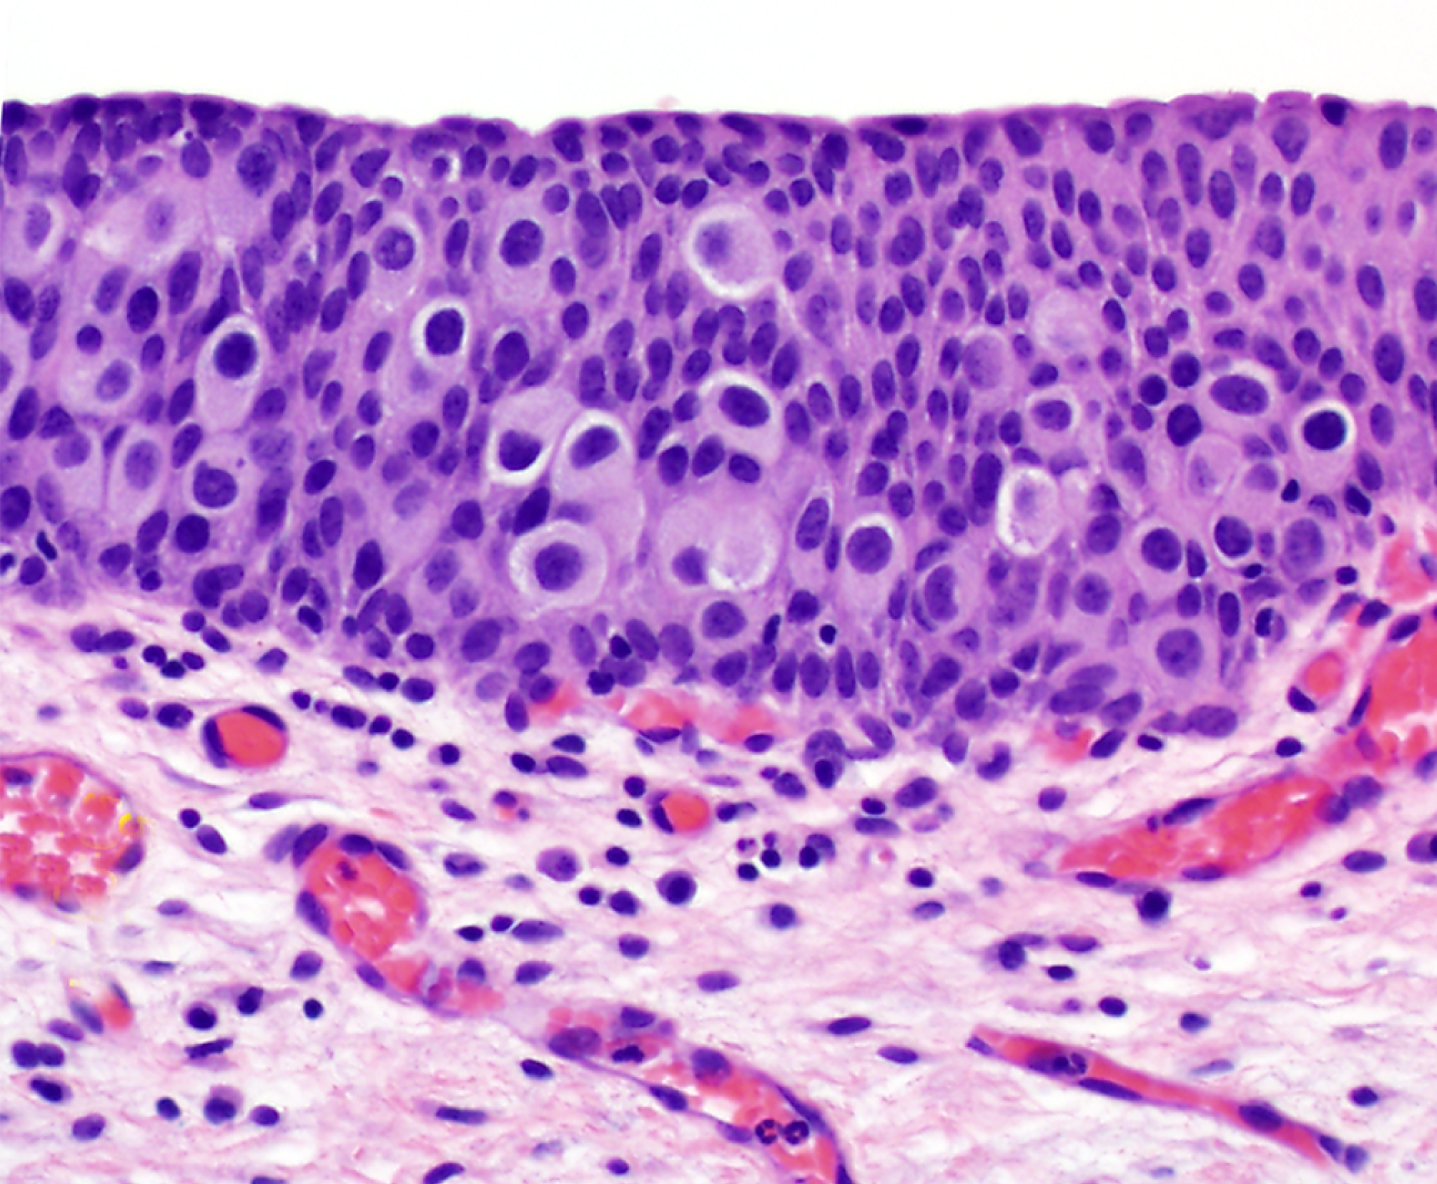 Urothelial carcinoma in situ shows a pagetoid growth pattern (×200).